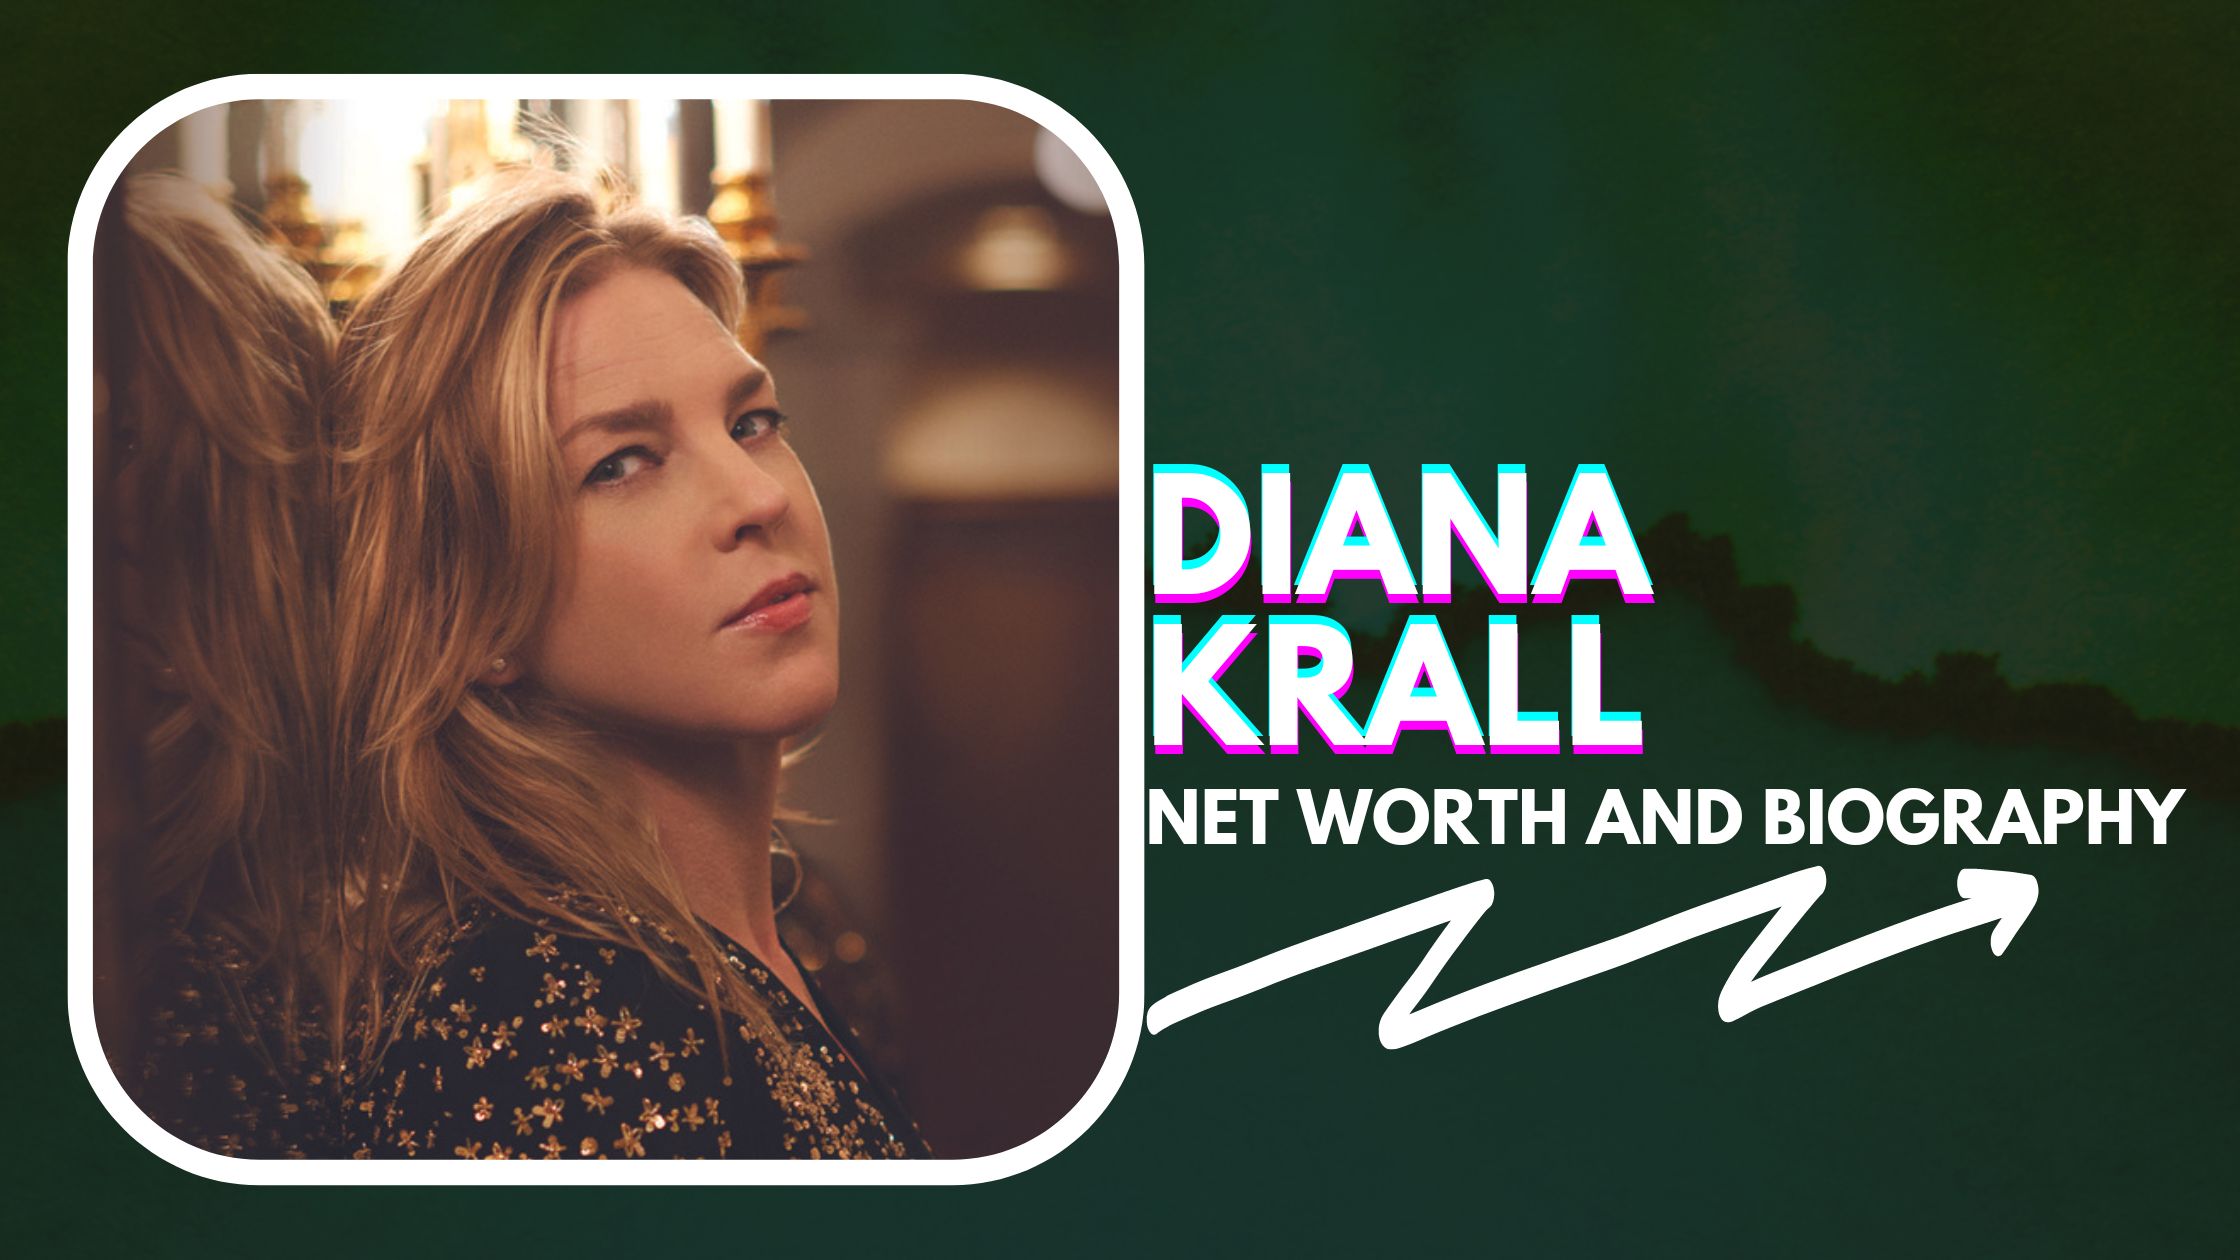 Diana Krall Net Worth and Biography